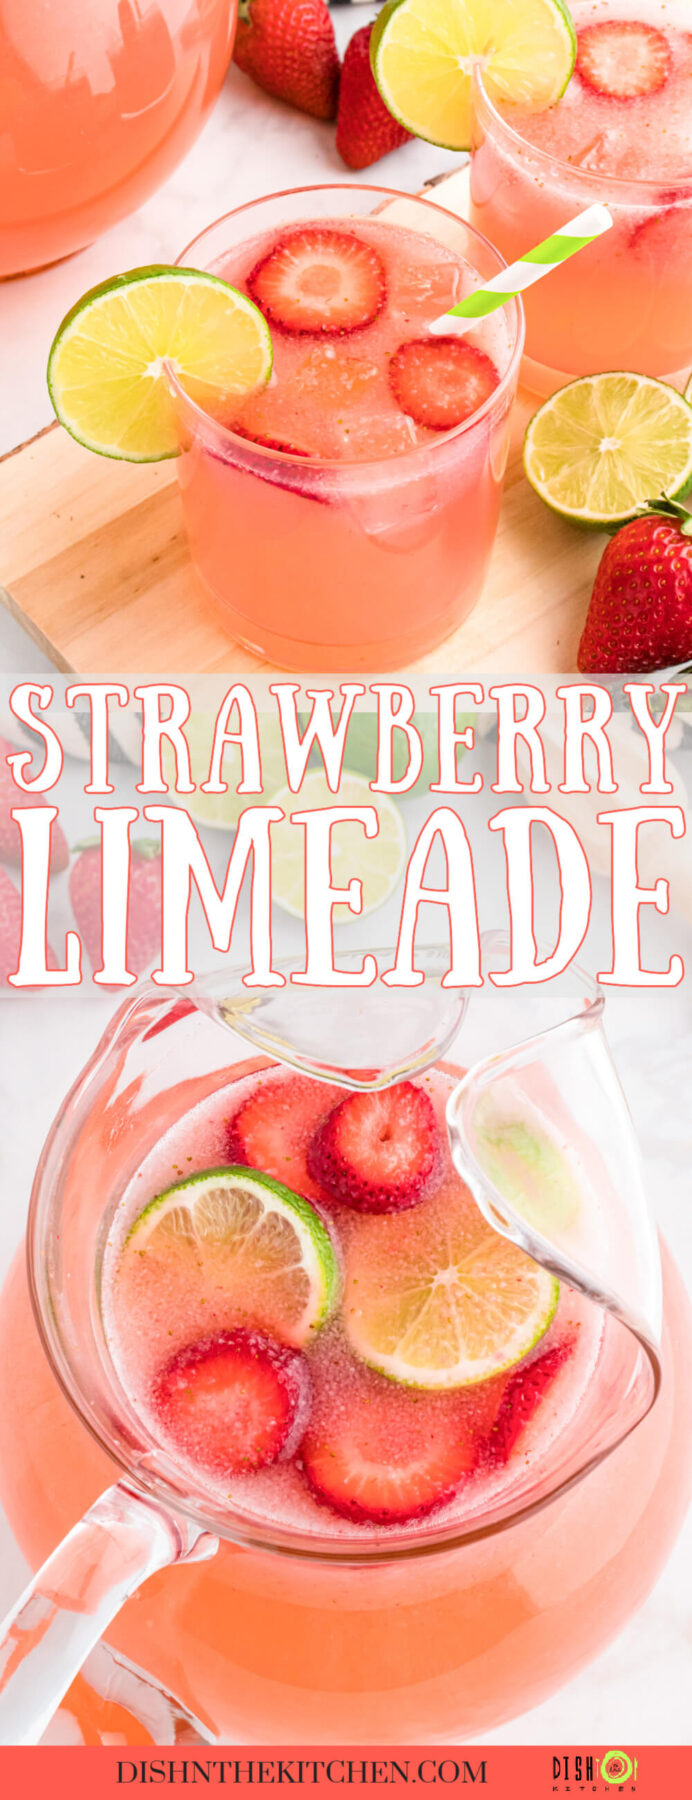 Pinterest image of a glass pitcher and glass full of pink Strawberry Limeade garnished with sliced strawberries and lime wheels.